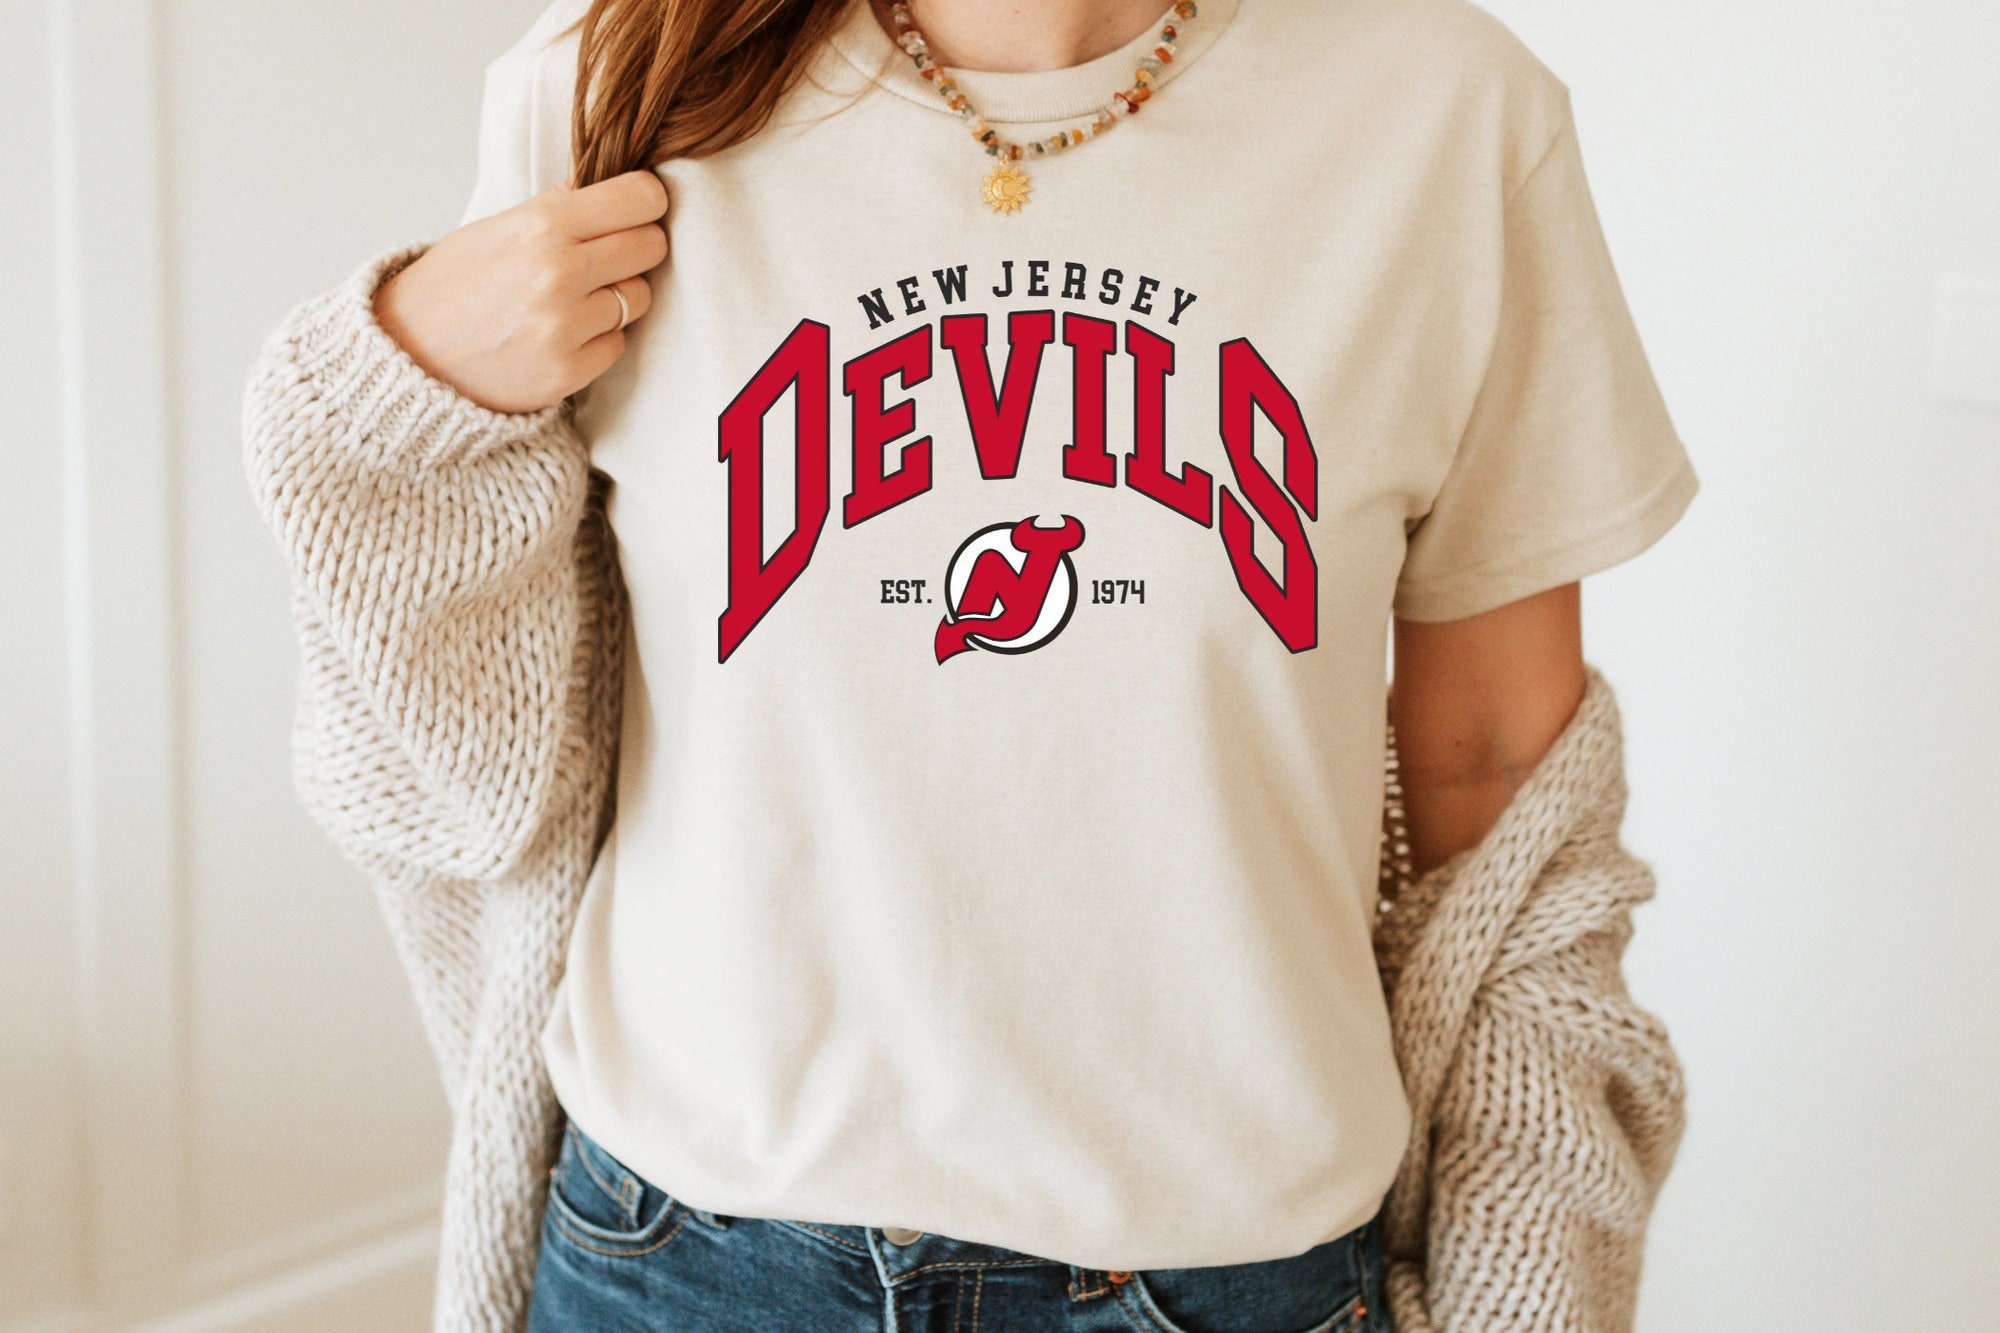 New Jersey Devils Super Dad Shirt - Bring Your Ideas, Thoughts And